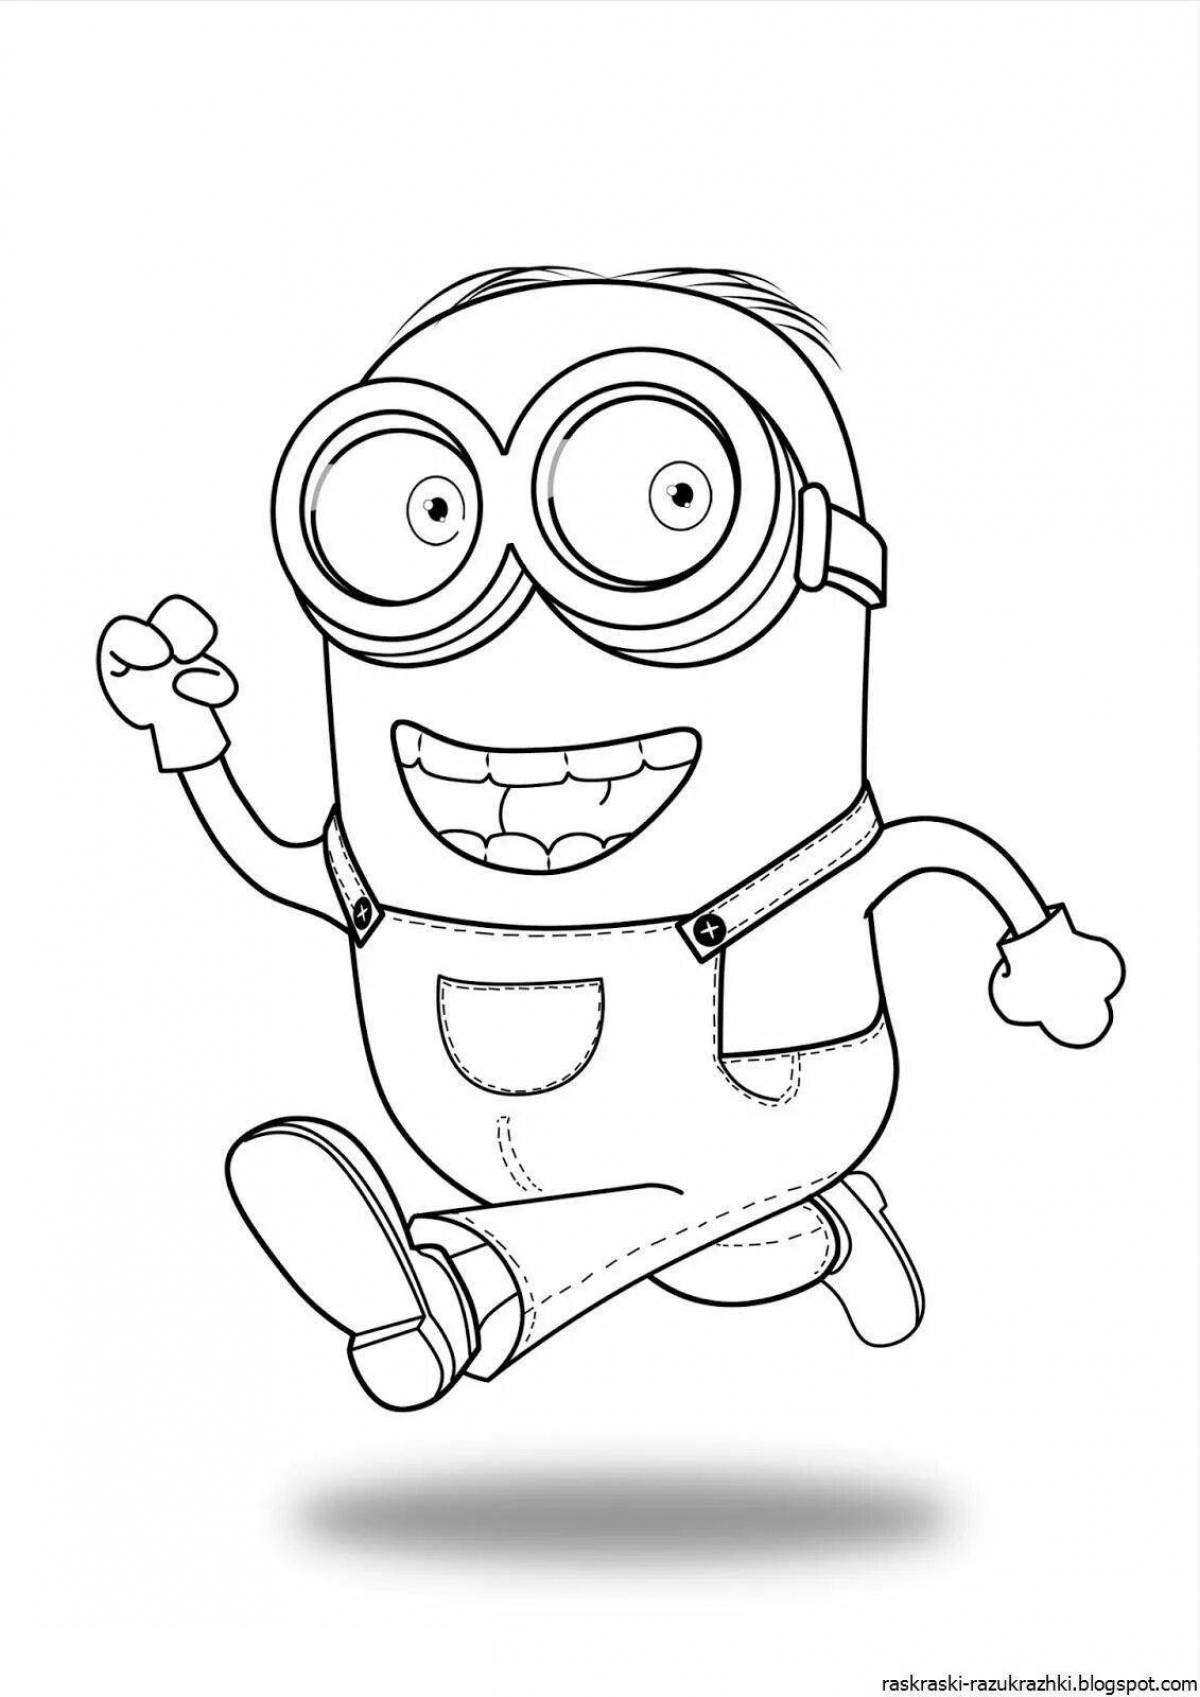 Minions coloring page for girls